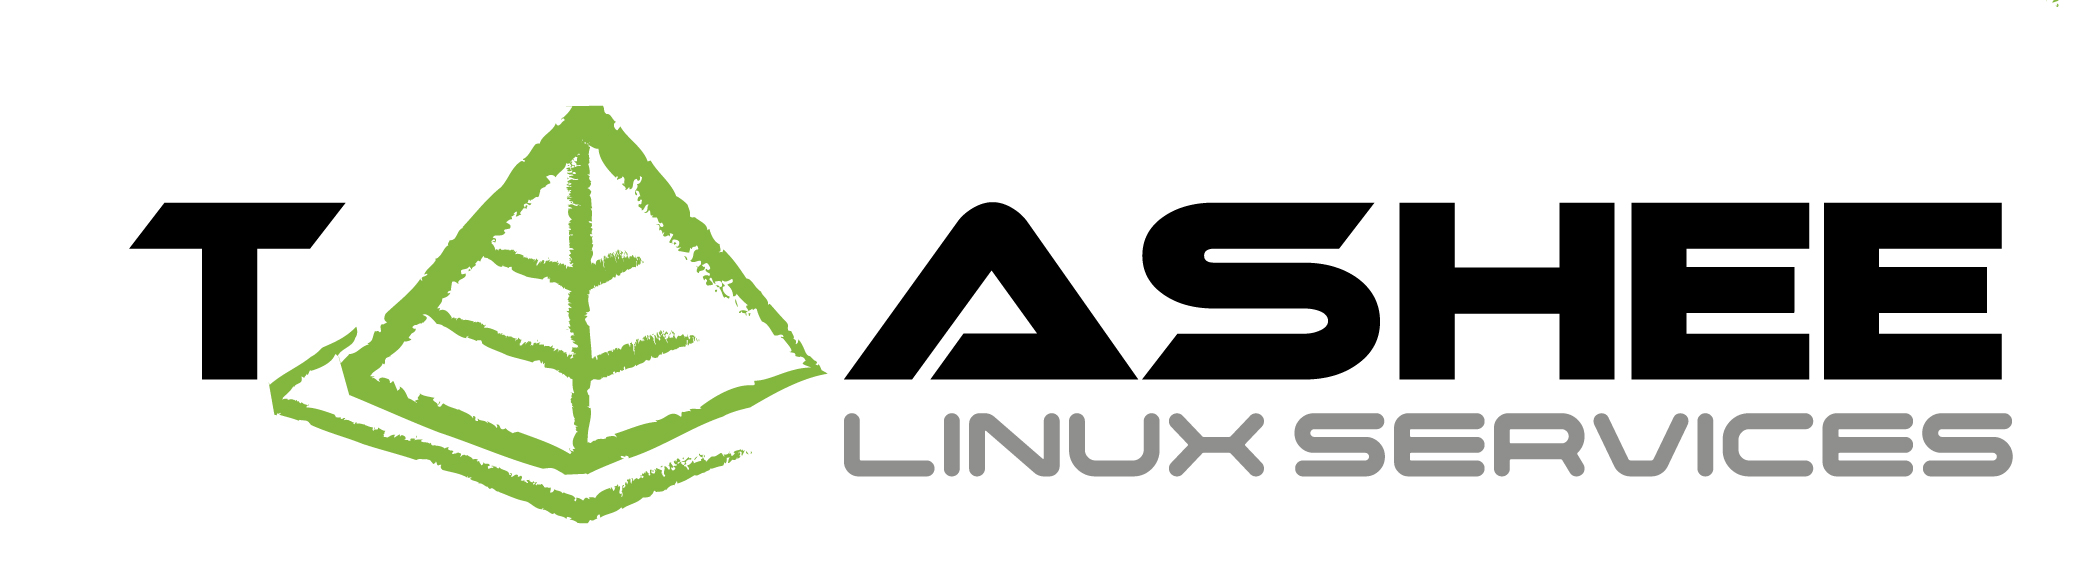 Taashee Linux Services logo